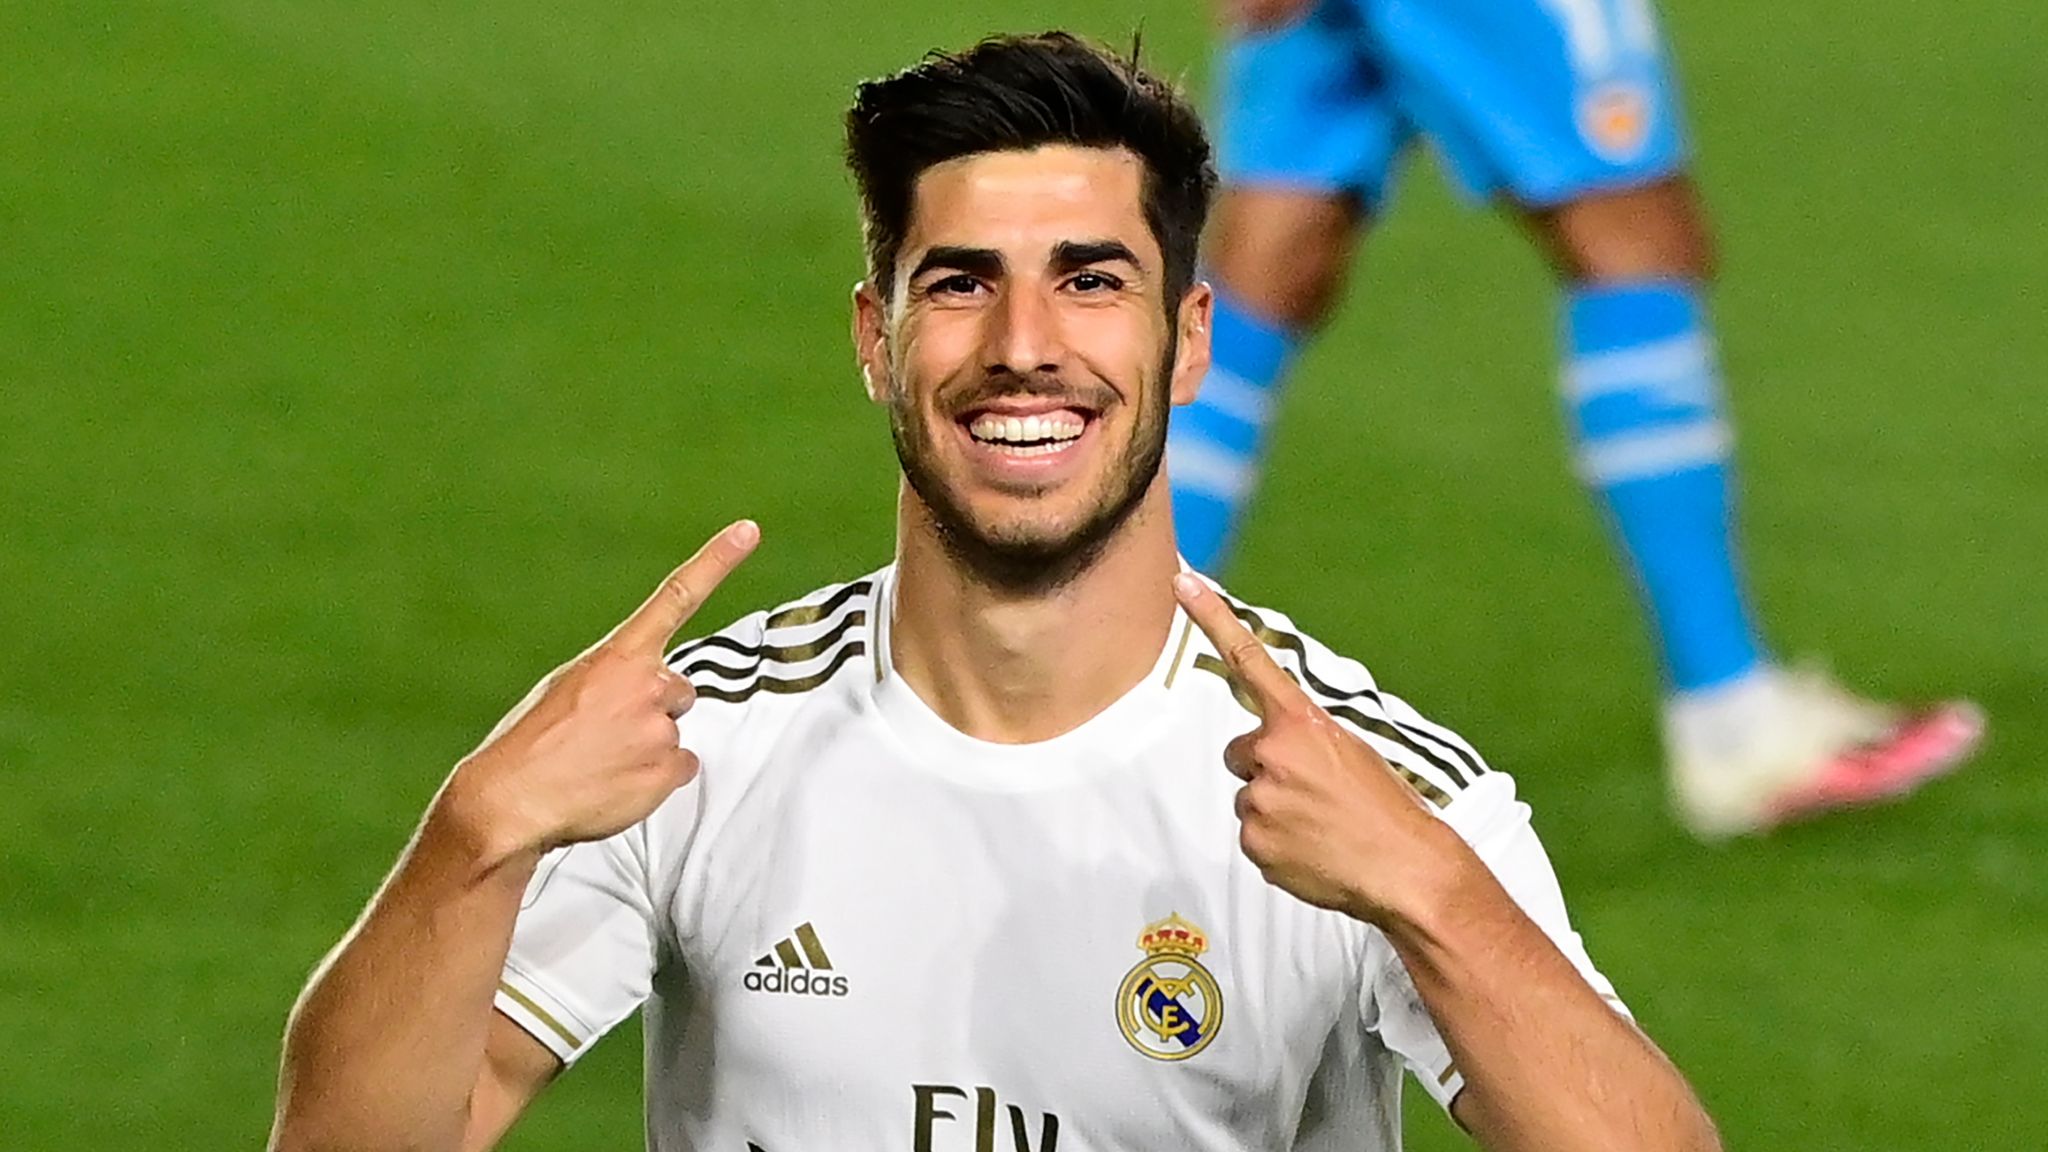 Real Madrid 30 Valencia Marco Asensio scores with first touch in